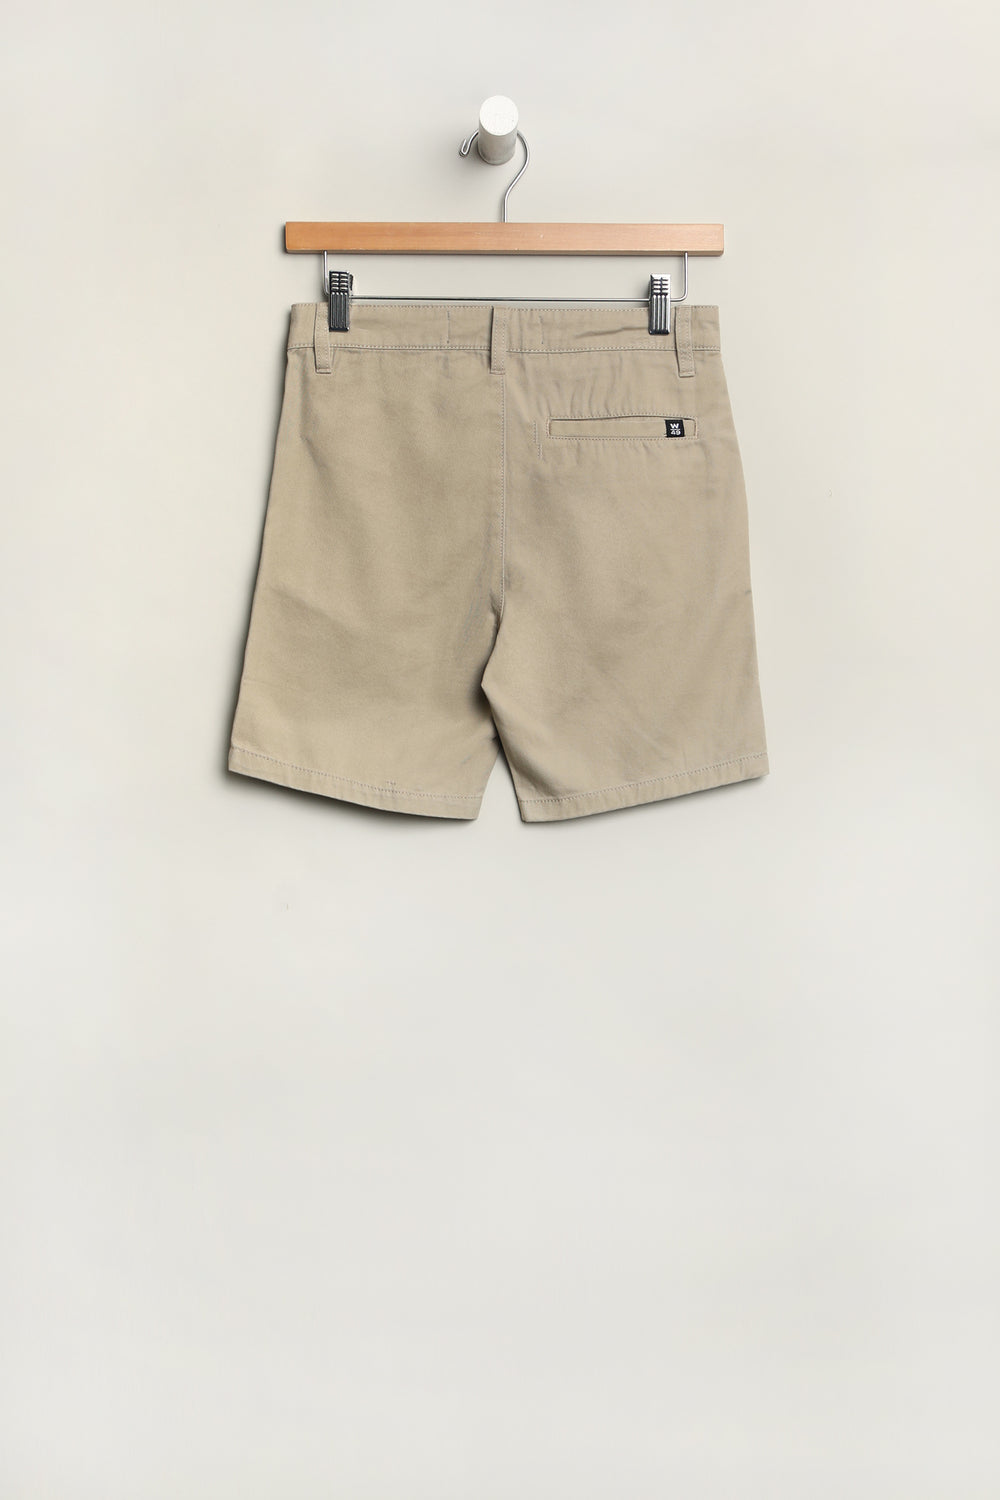 West49 Youth Twill Chino Shorts West49 Youth Twill Chino Shorts